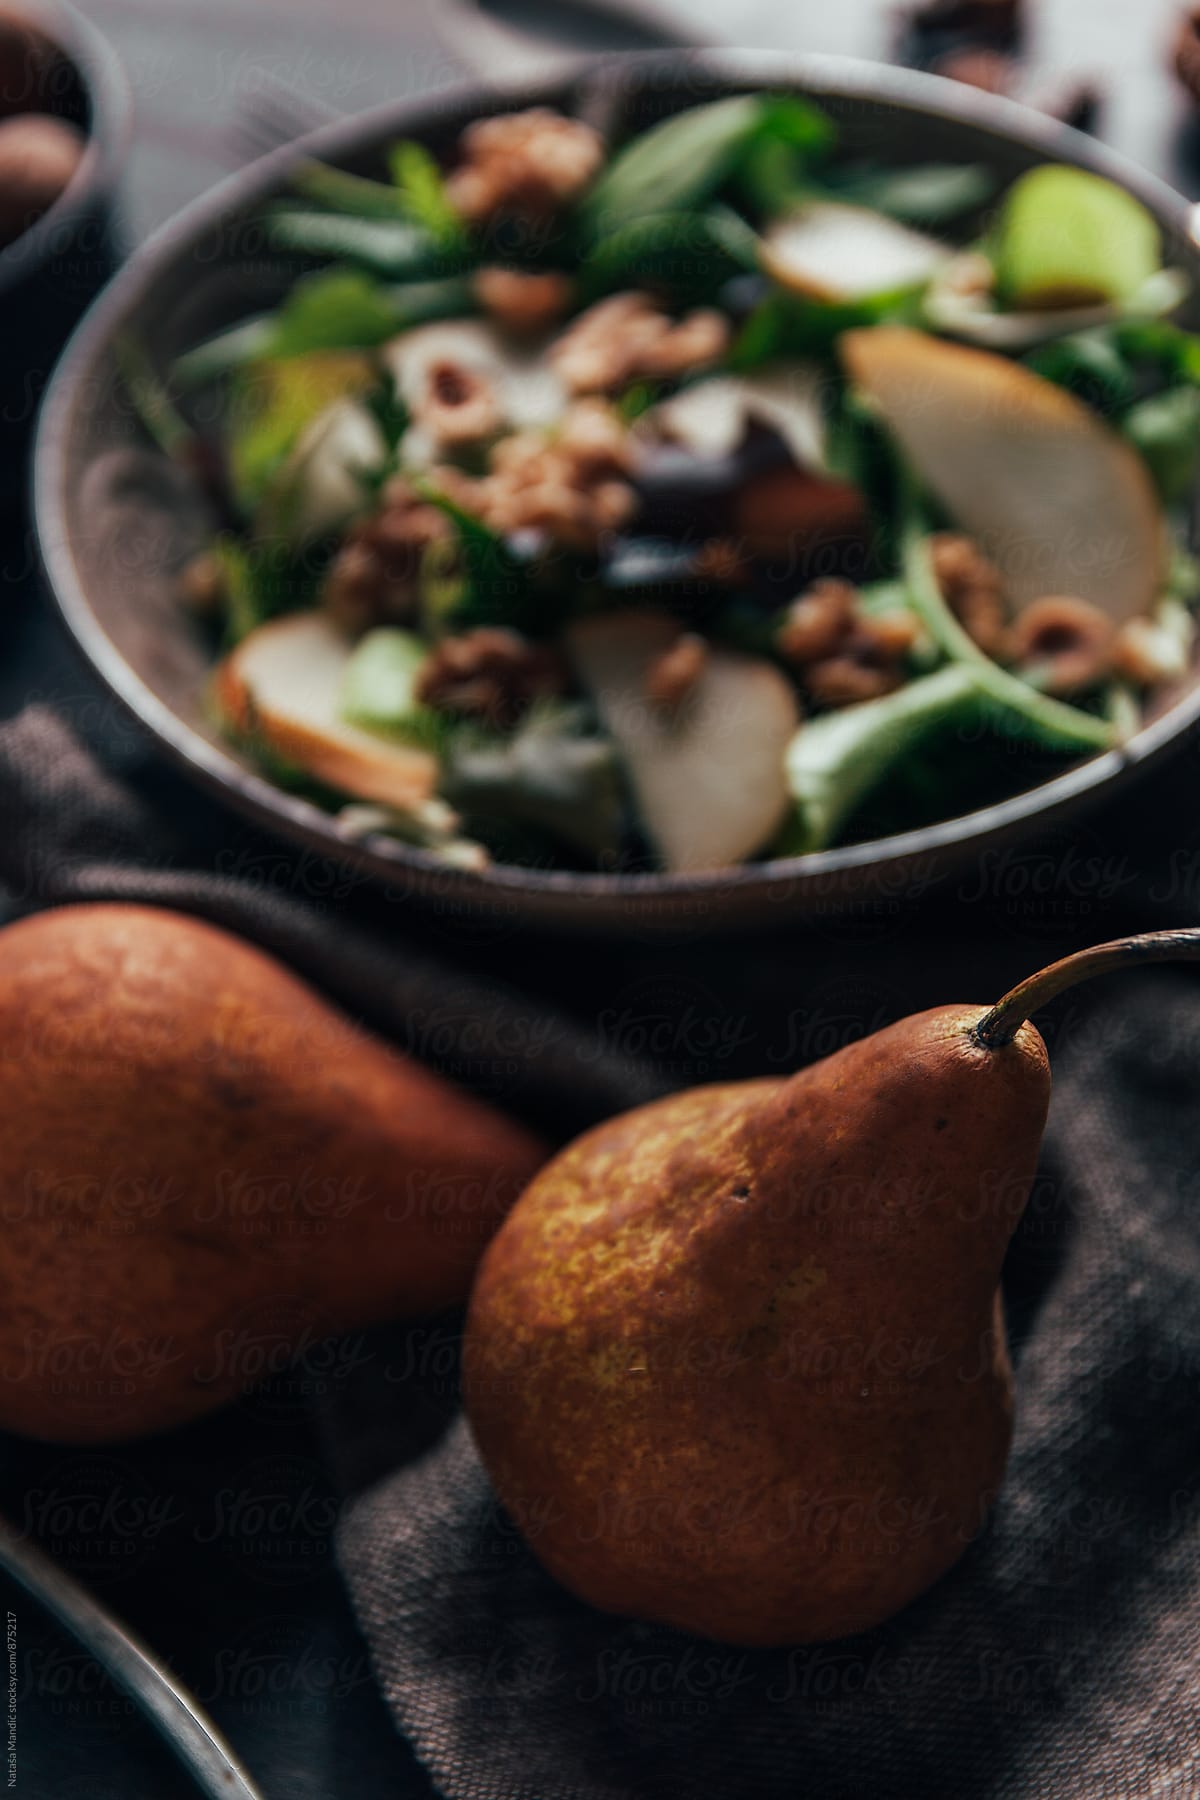 Delicious salad with pear, walnuts and hazelnuts